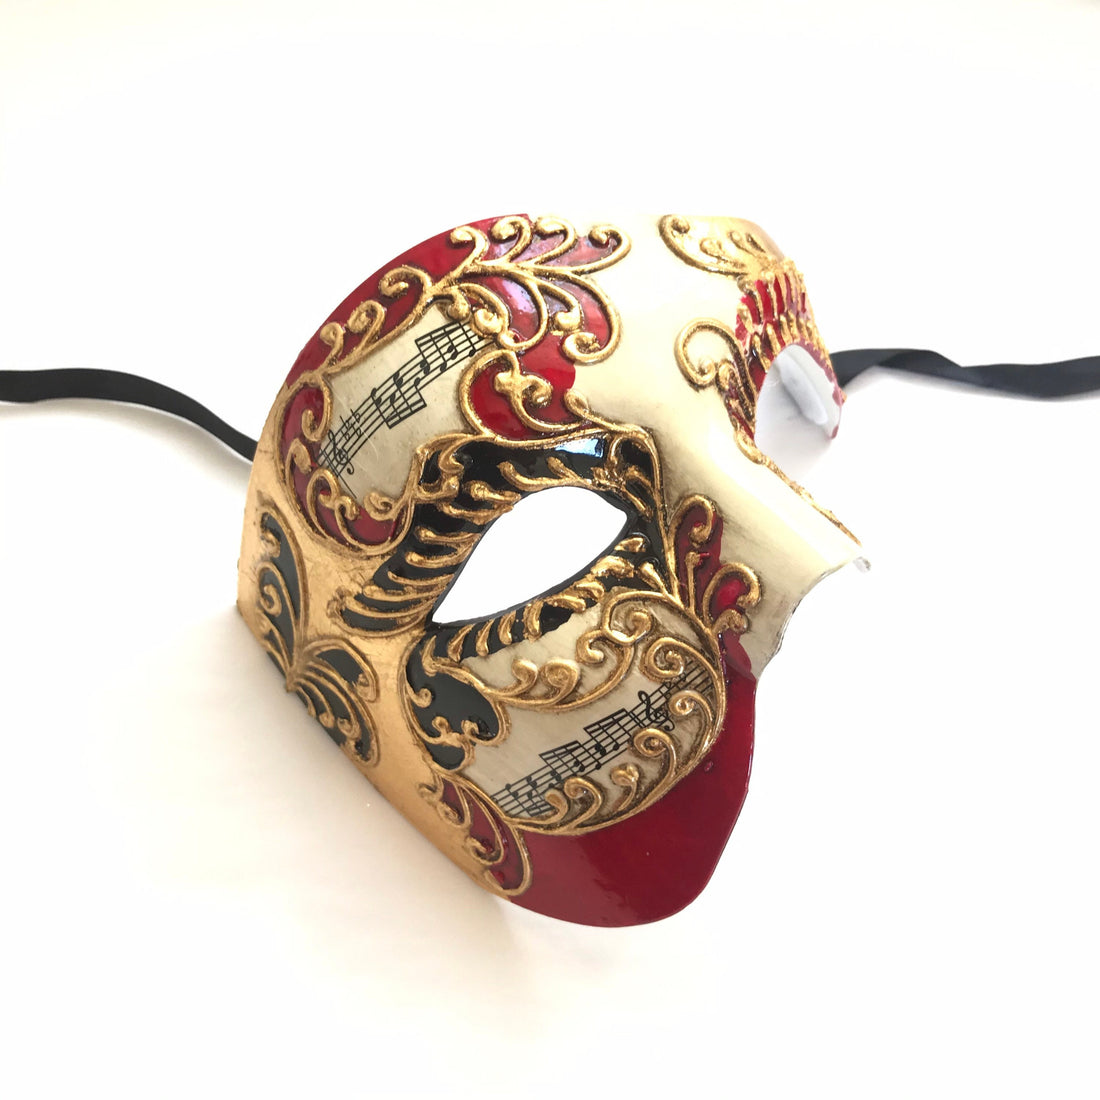 Mens venetian masquerade mask for sale in red/black/gold.